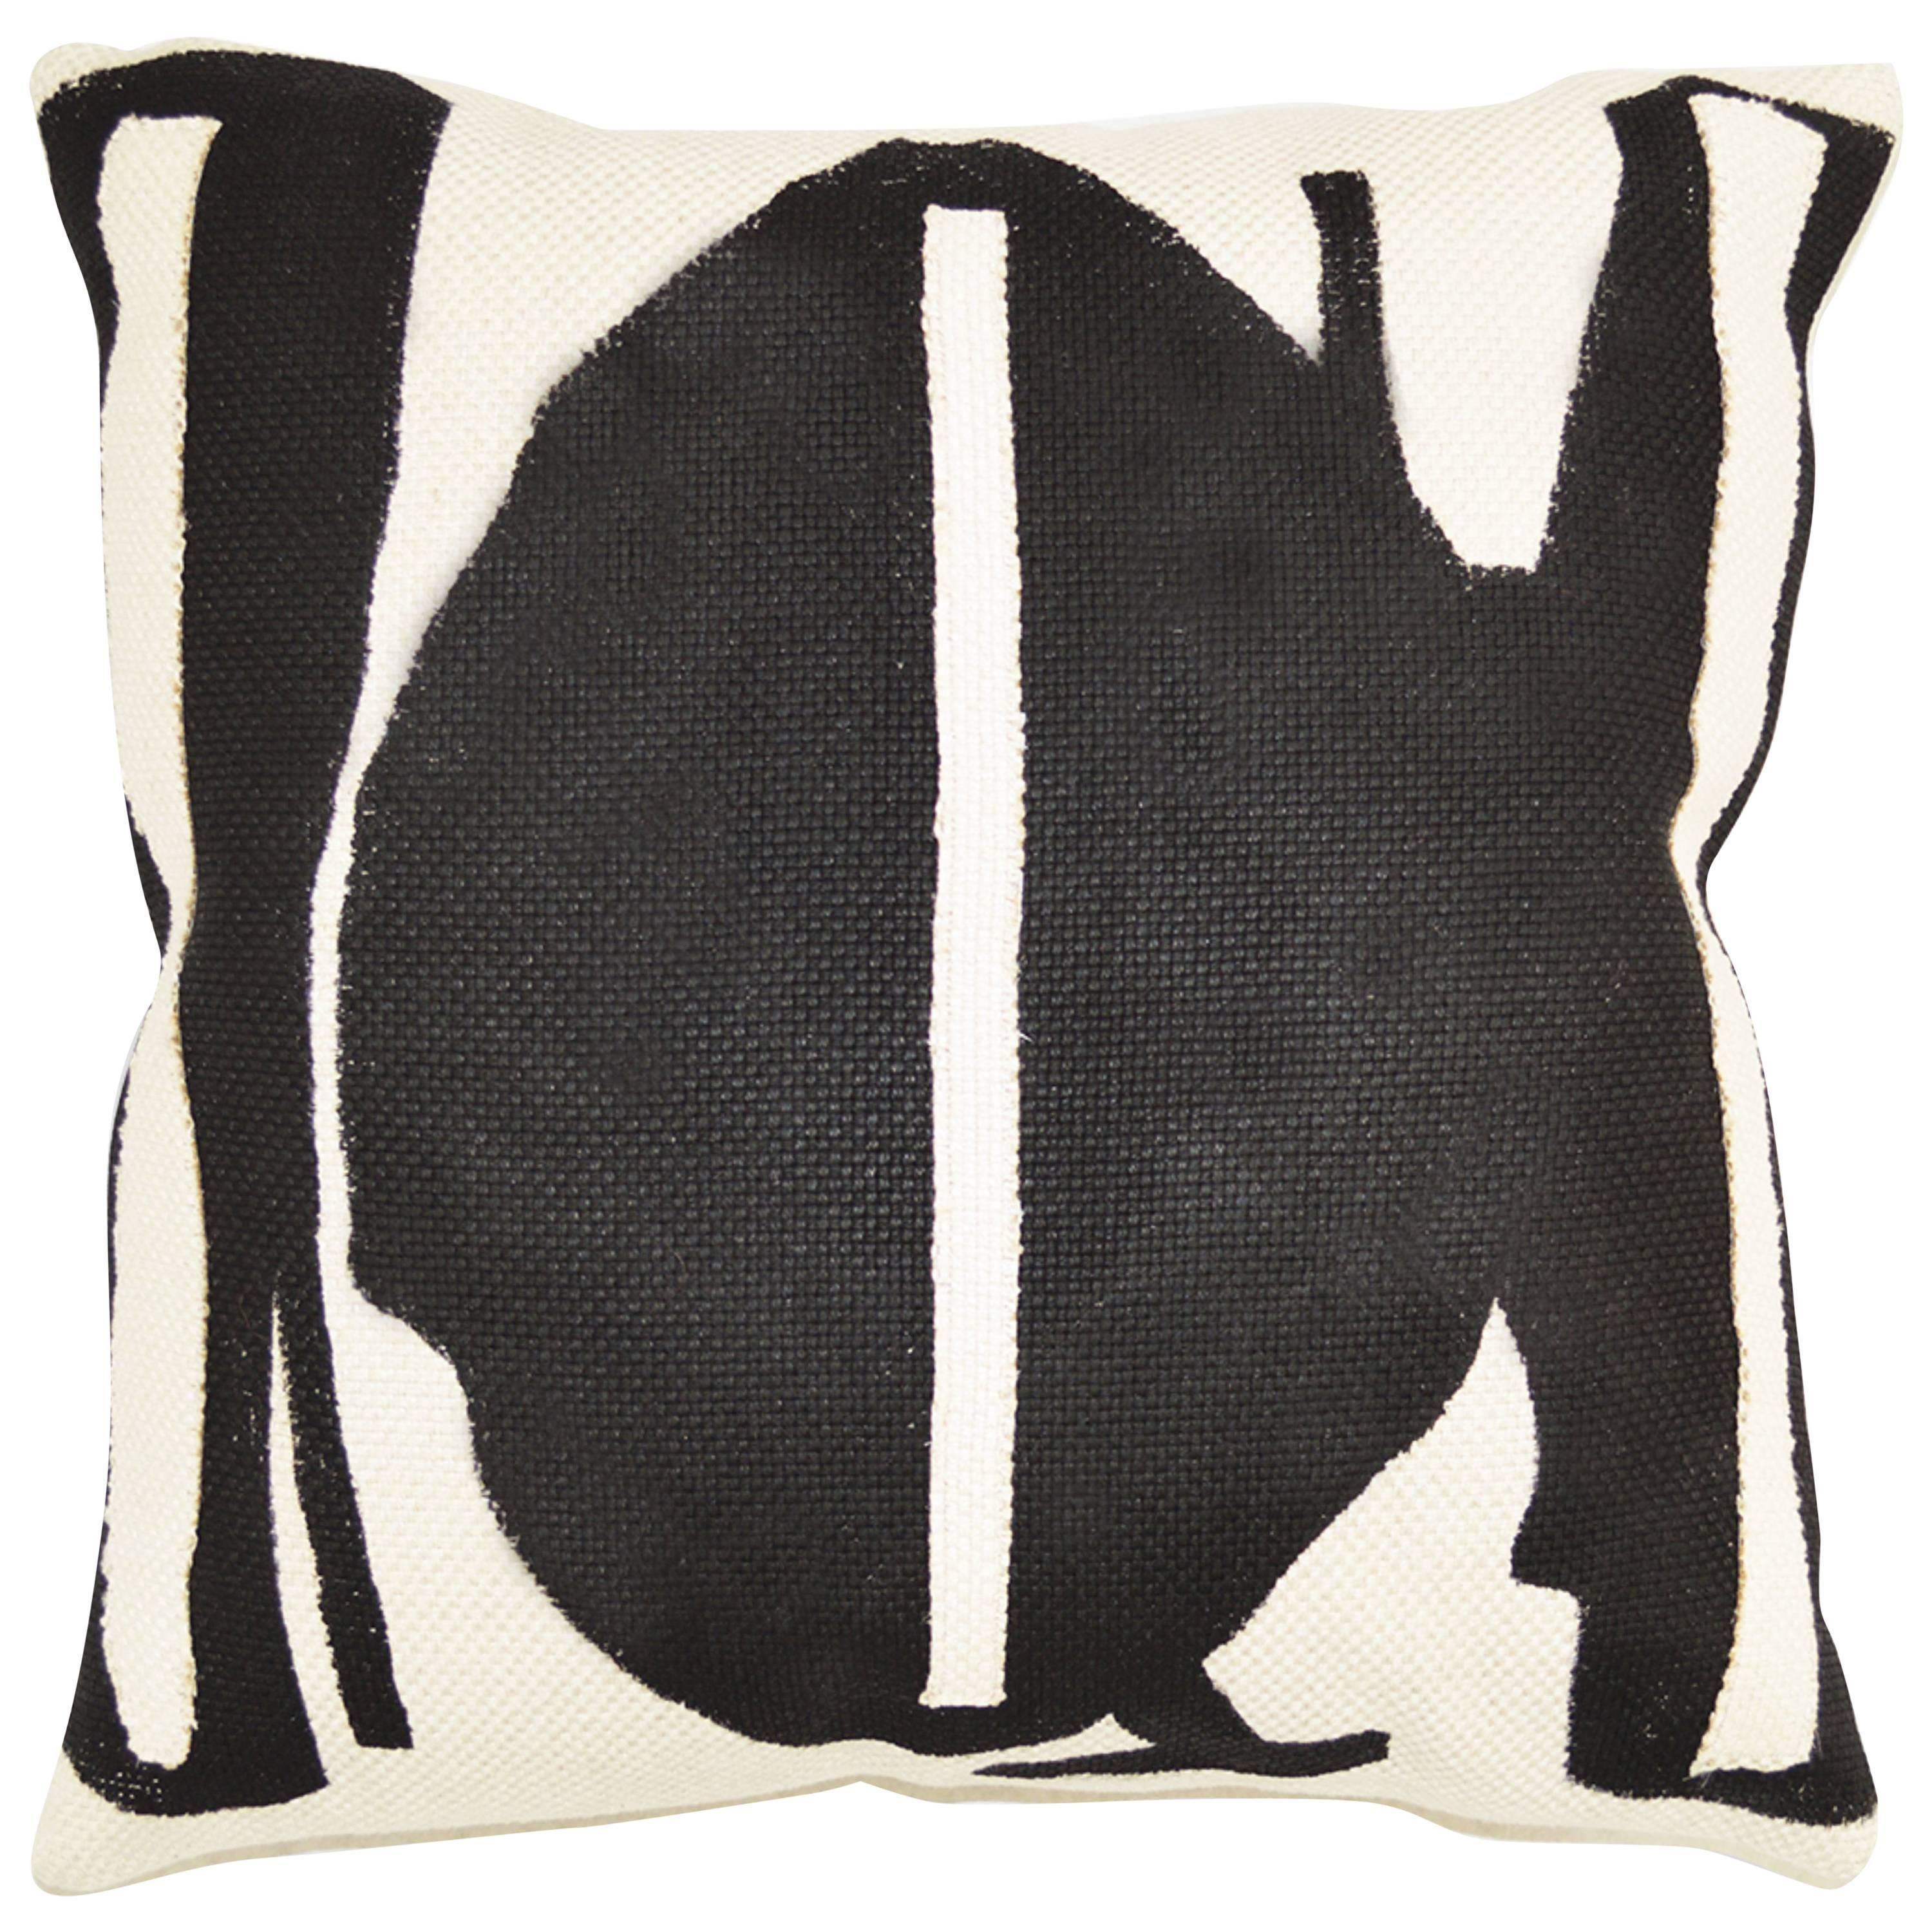 Galant Form, Contemporary One-of-a-Kind Black and White Handmade Linen Pillow For Sale